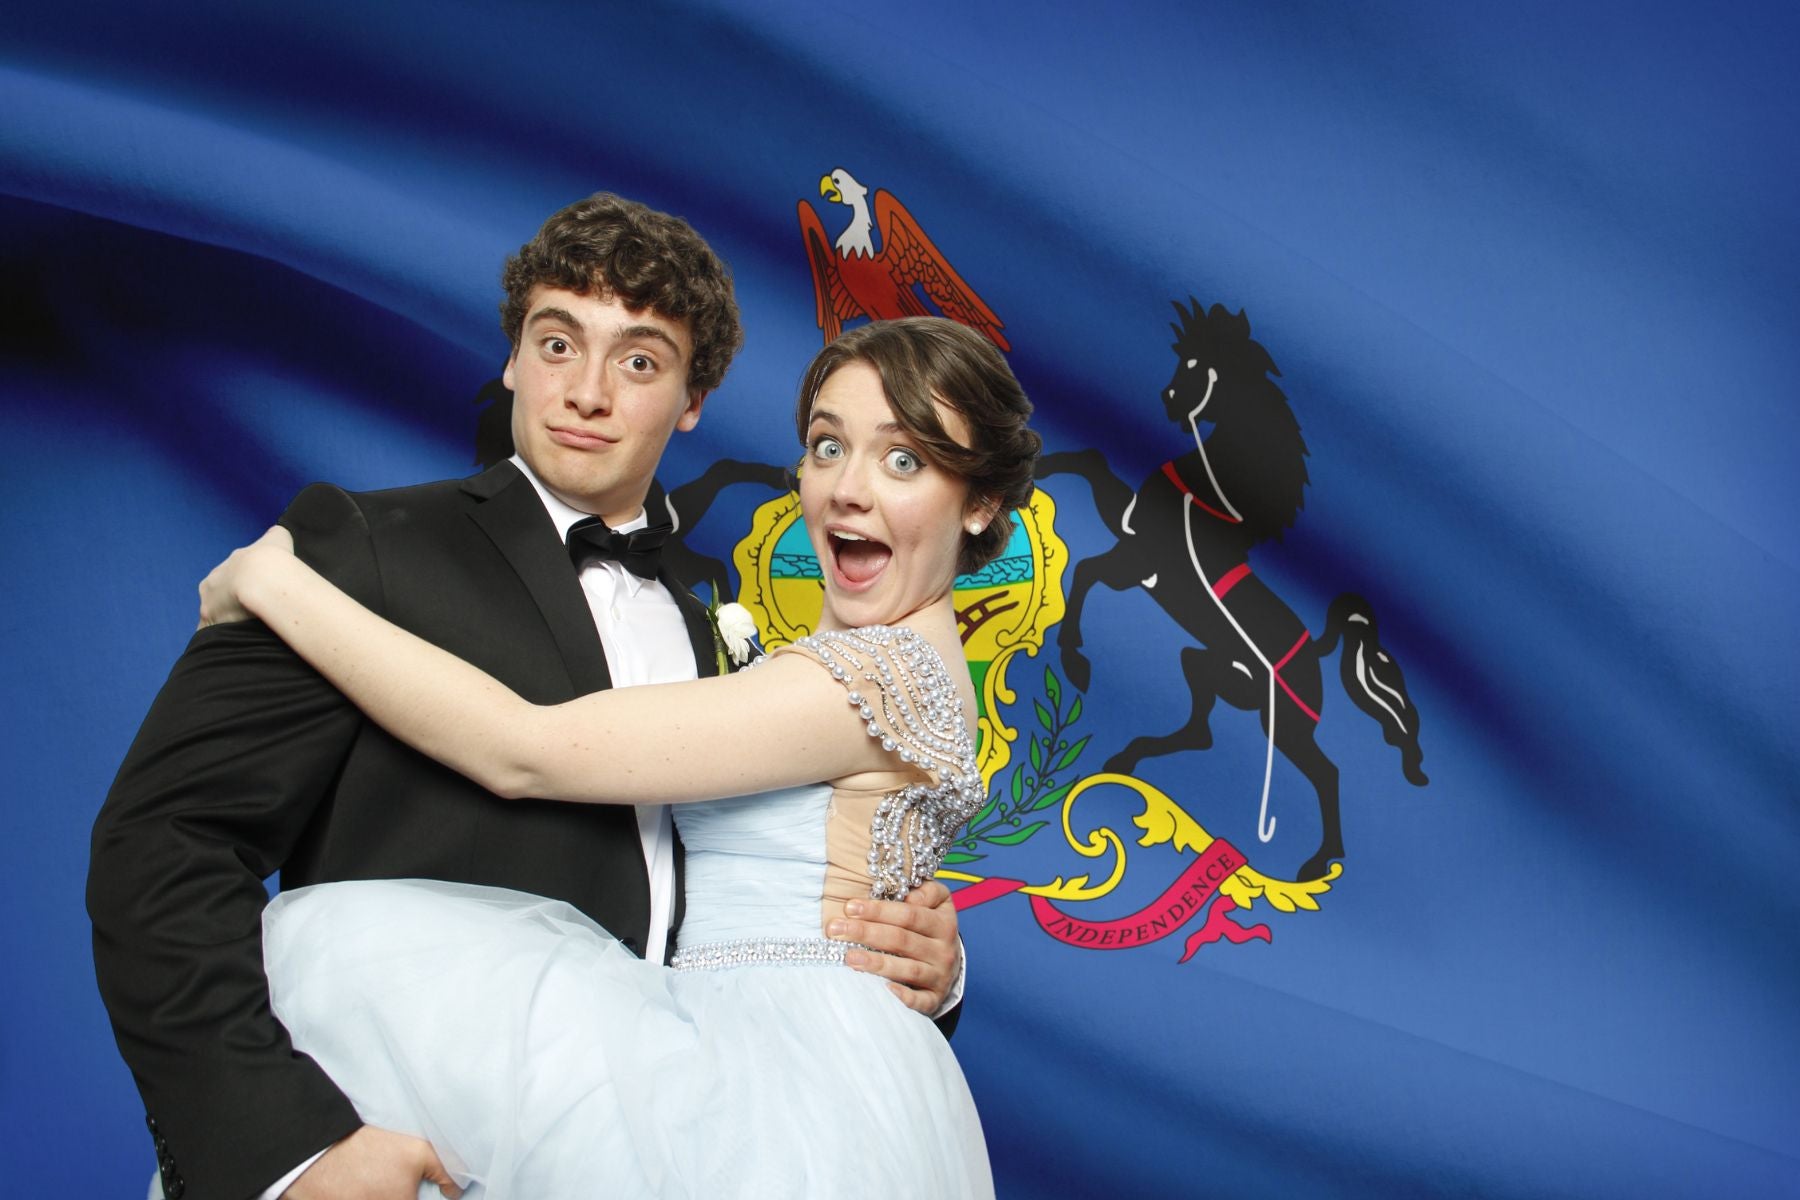 Bride and Groom posing for a wedding photo booth picture in front of a Pennsylvania state flag